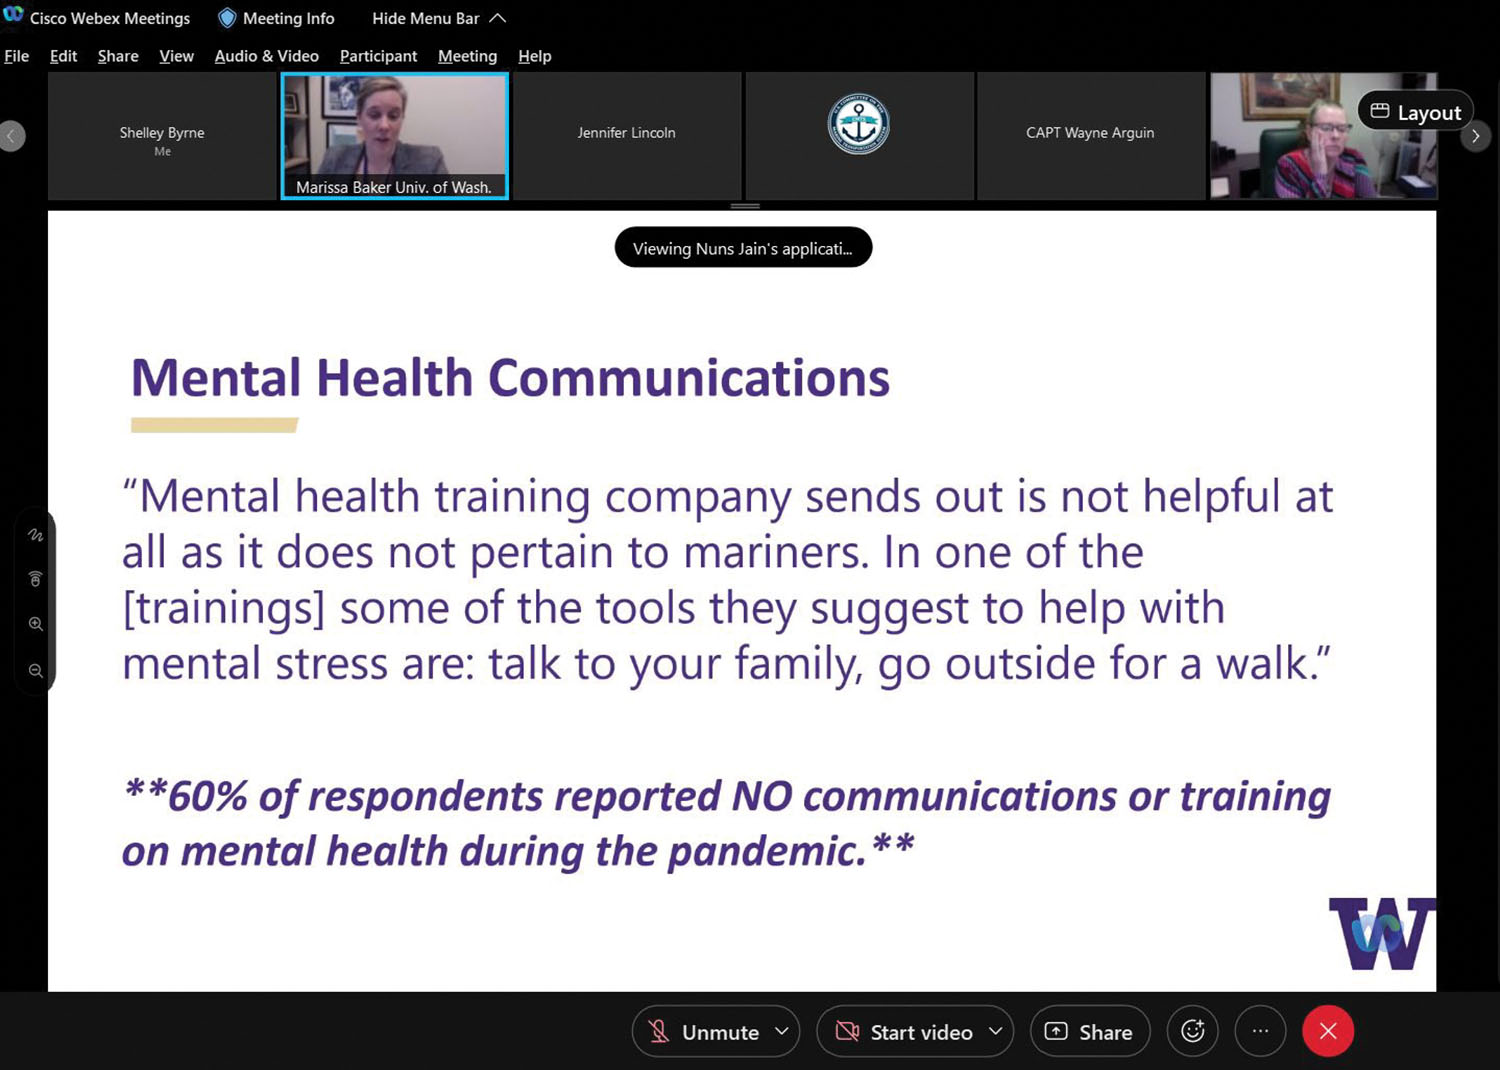 Dr. Marissa Baker of the University of Washington discusses the needs of better mental health communication to mariners as part of a webinar on the results of the study she led on mariner health during the COVID-19 pandemic.